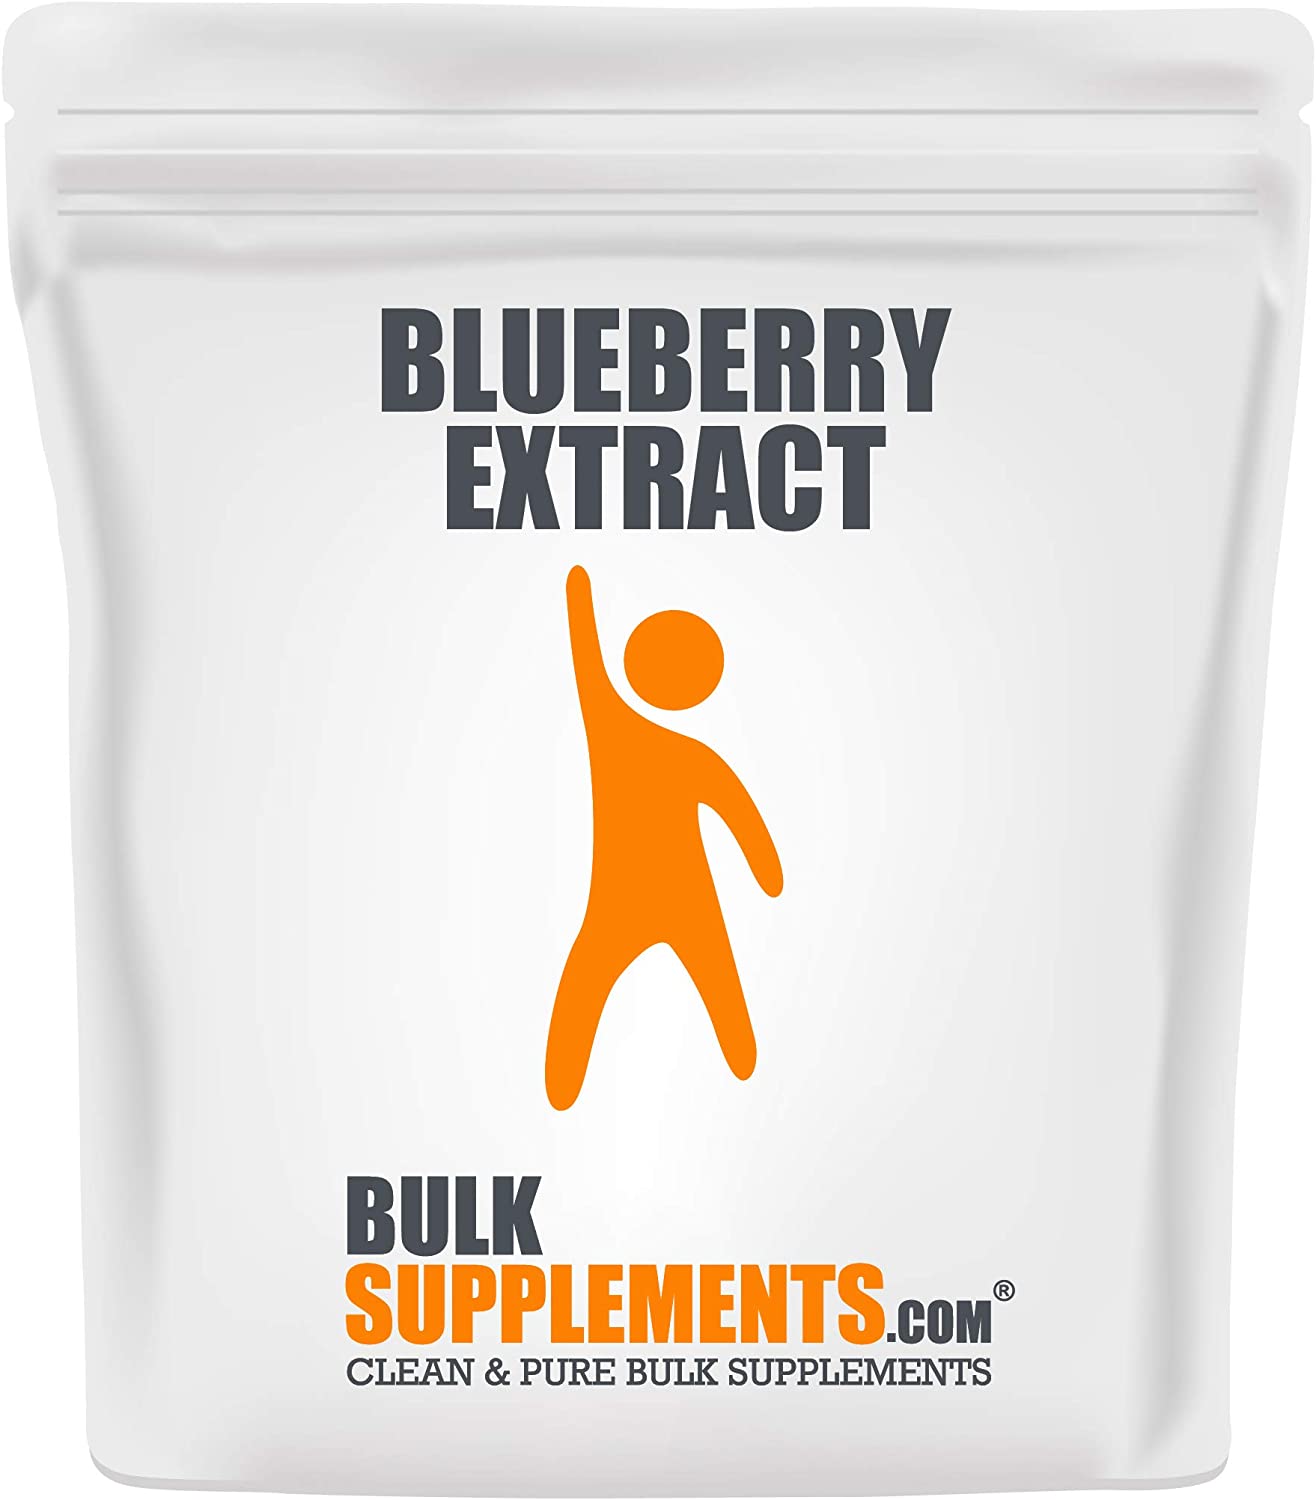 Best Blueberry Supplements – Top 10 Brands Reviewed for 2022 11